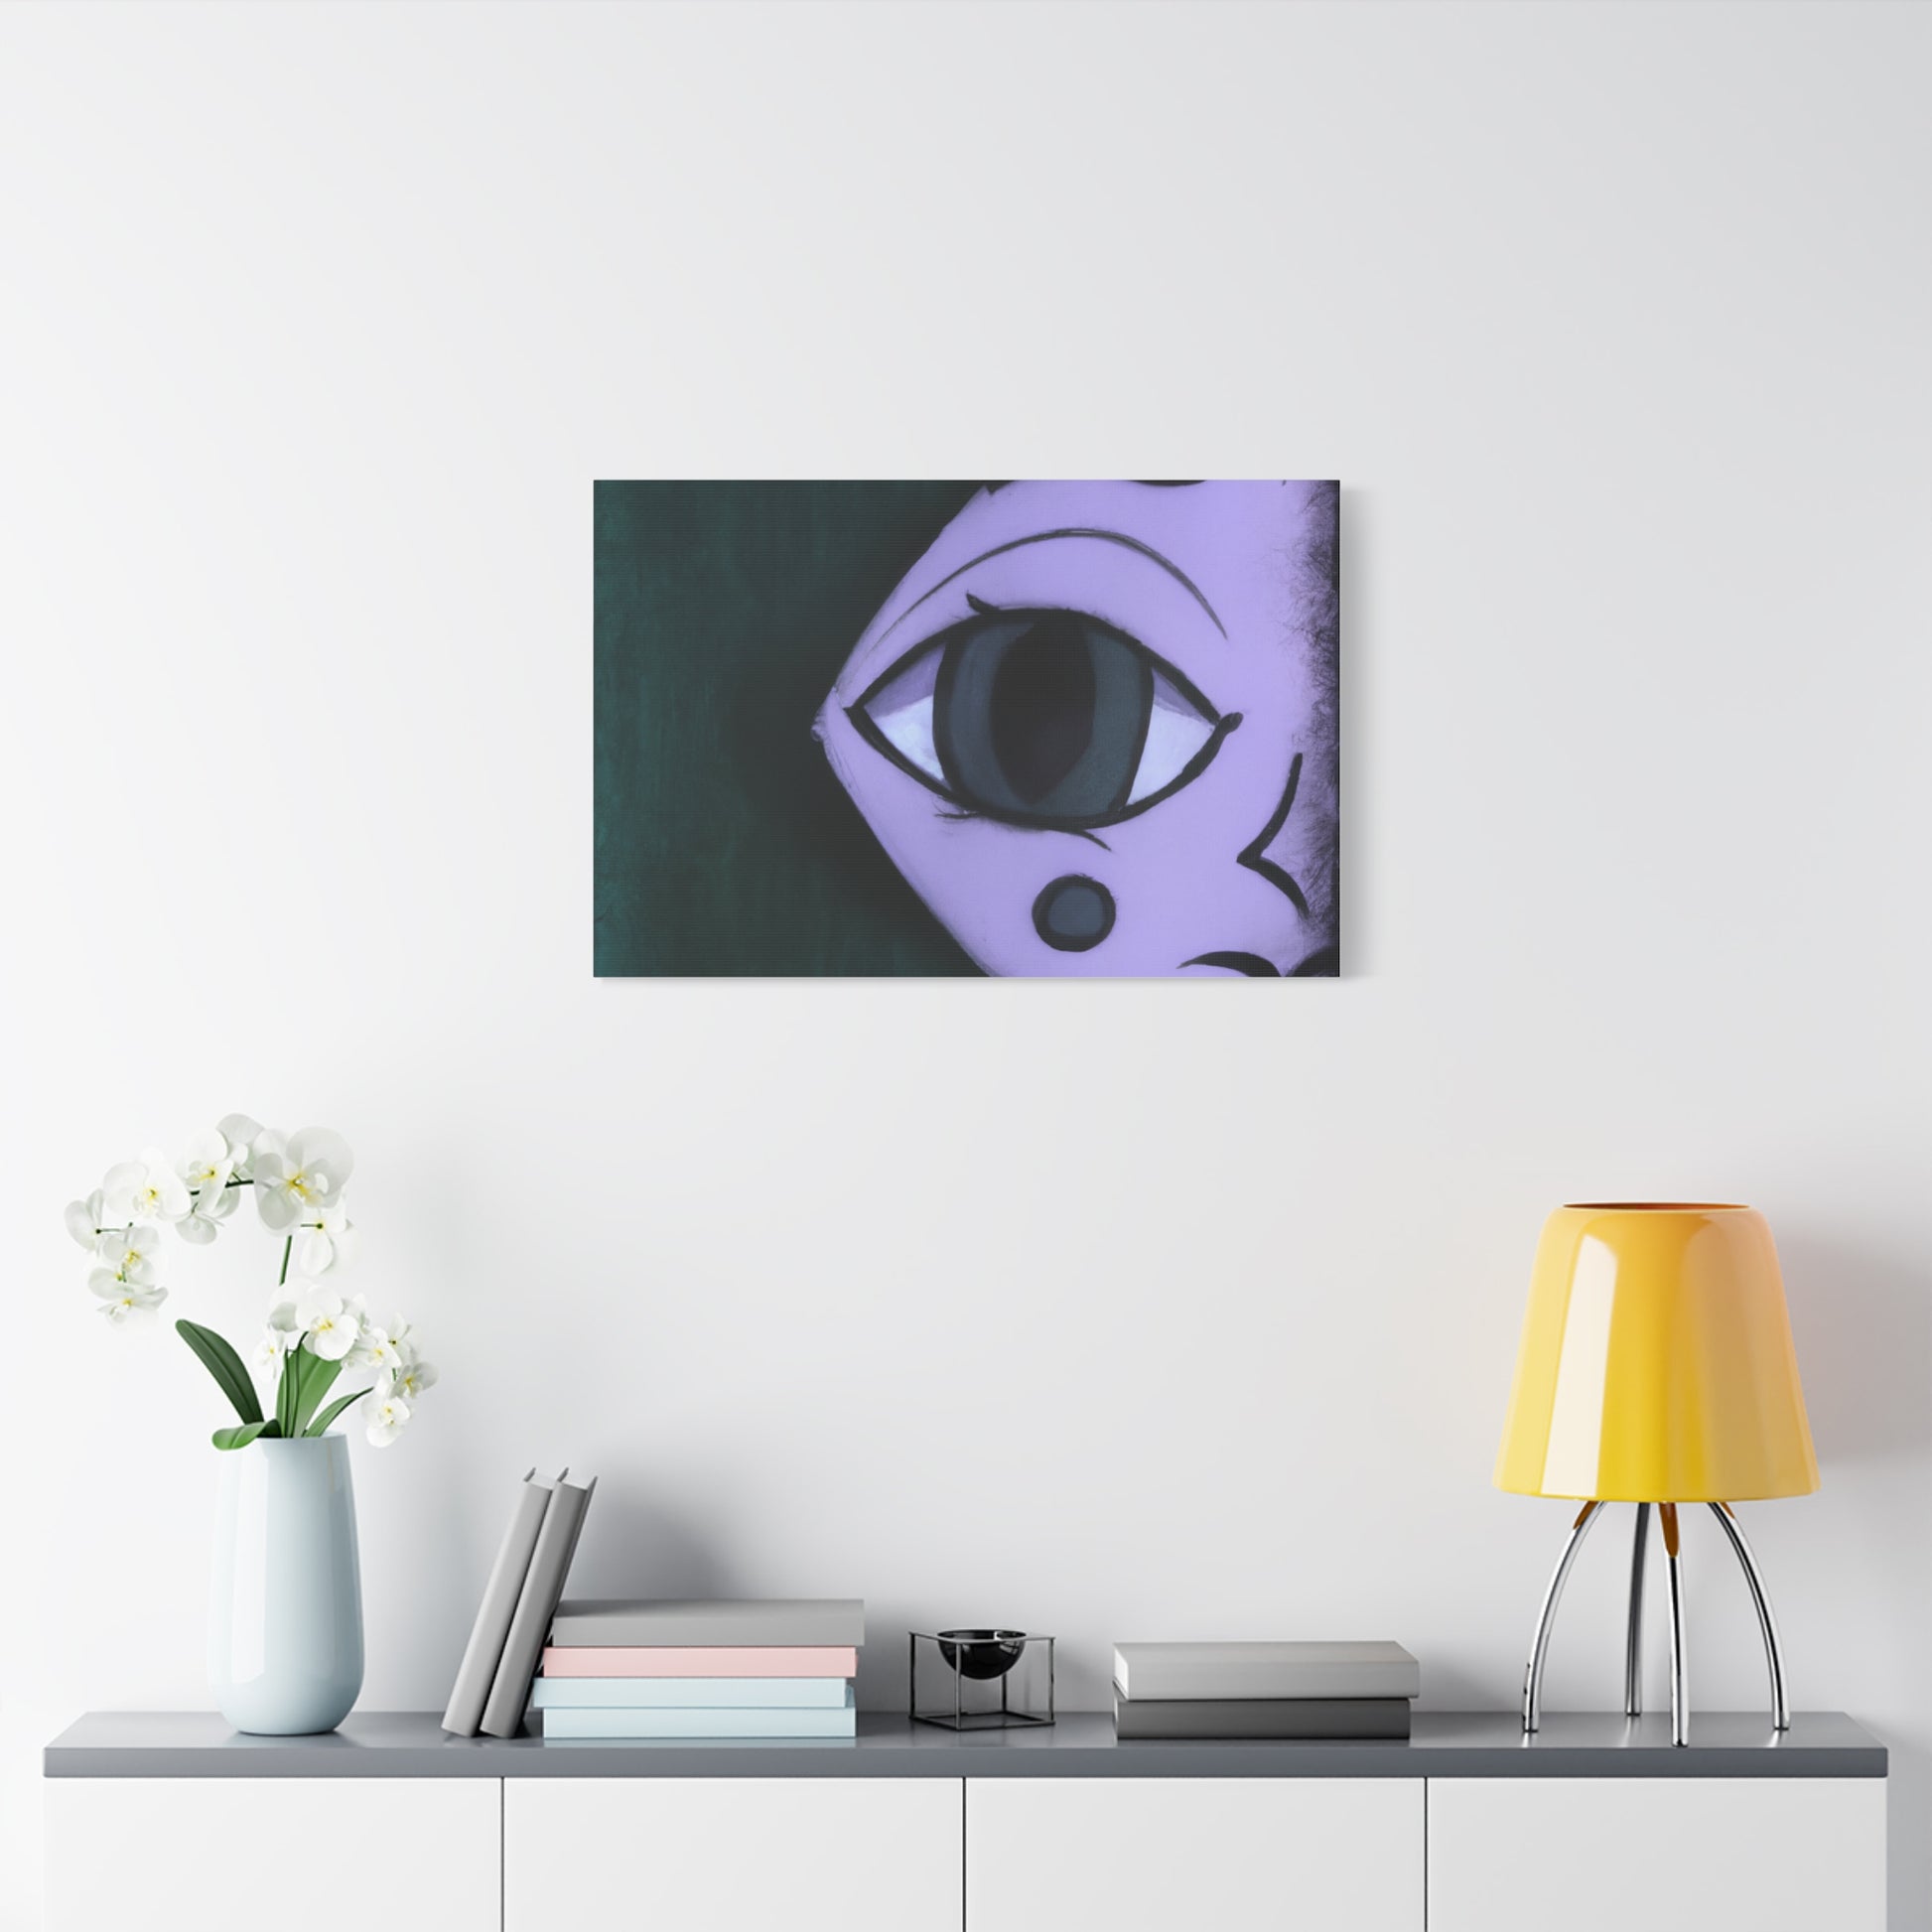 Abstract Digital Art Anime Style Decor Hanging Wall Painting Canvas Wall Art Print